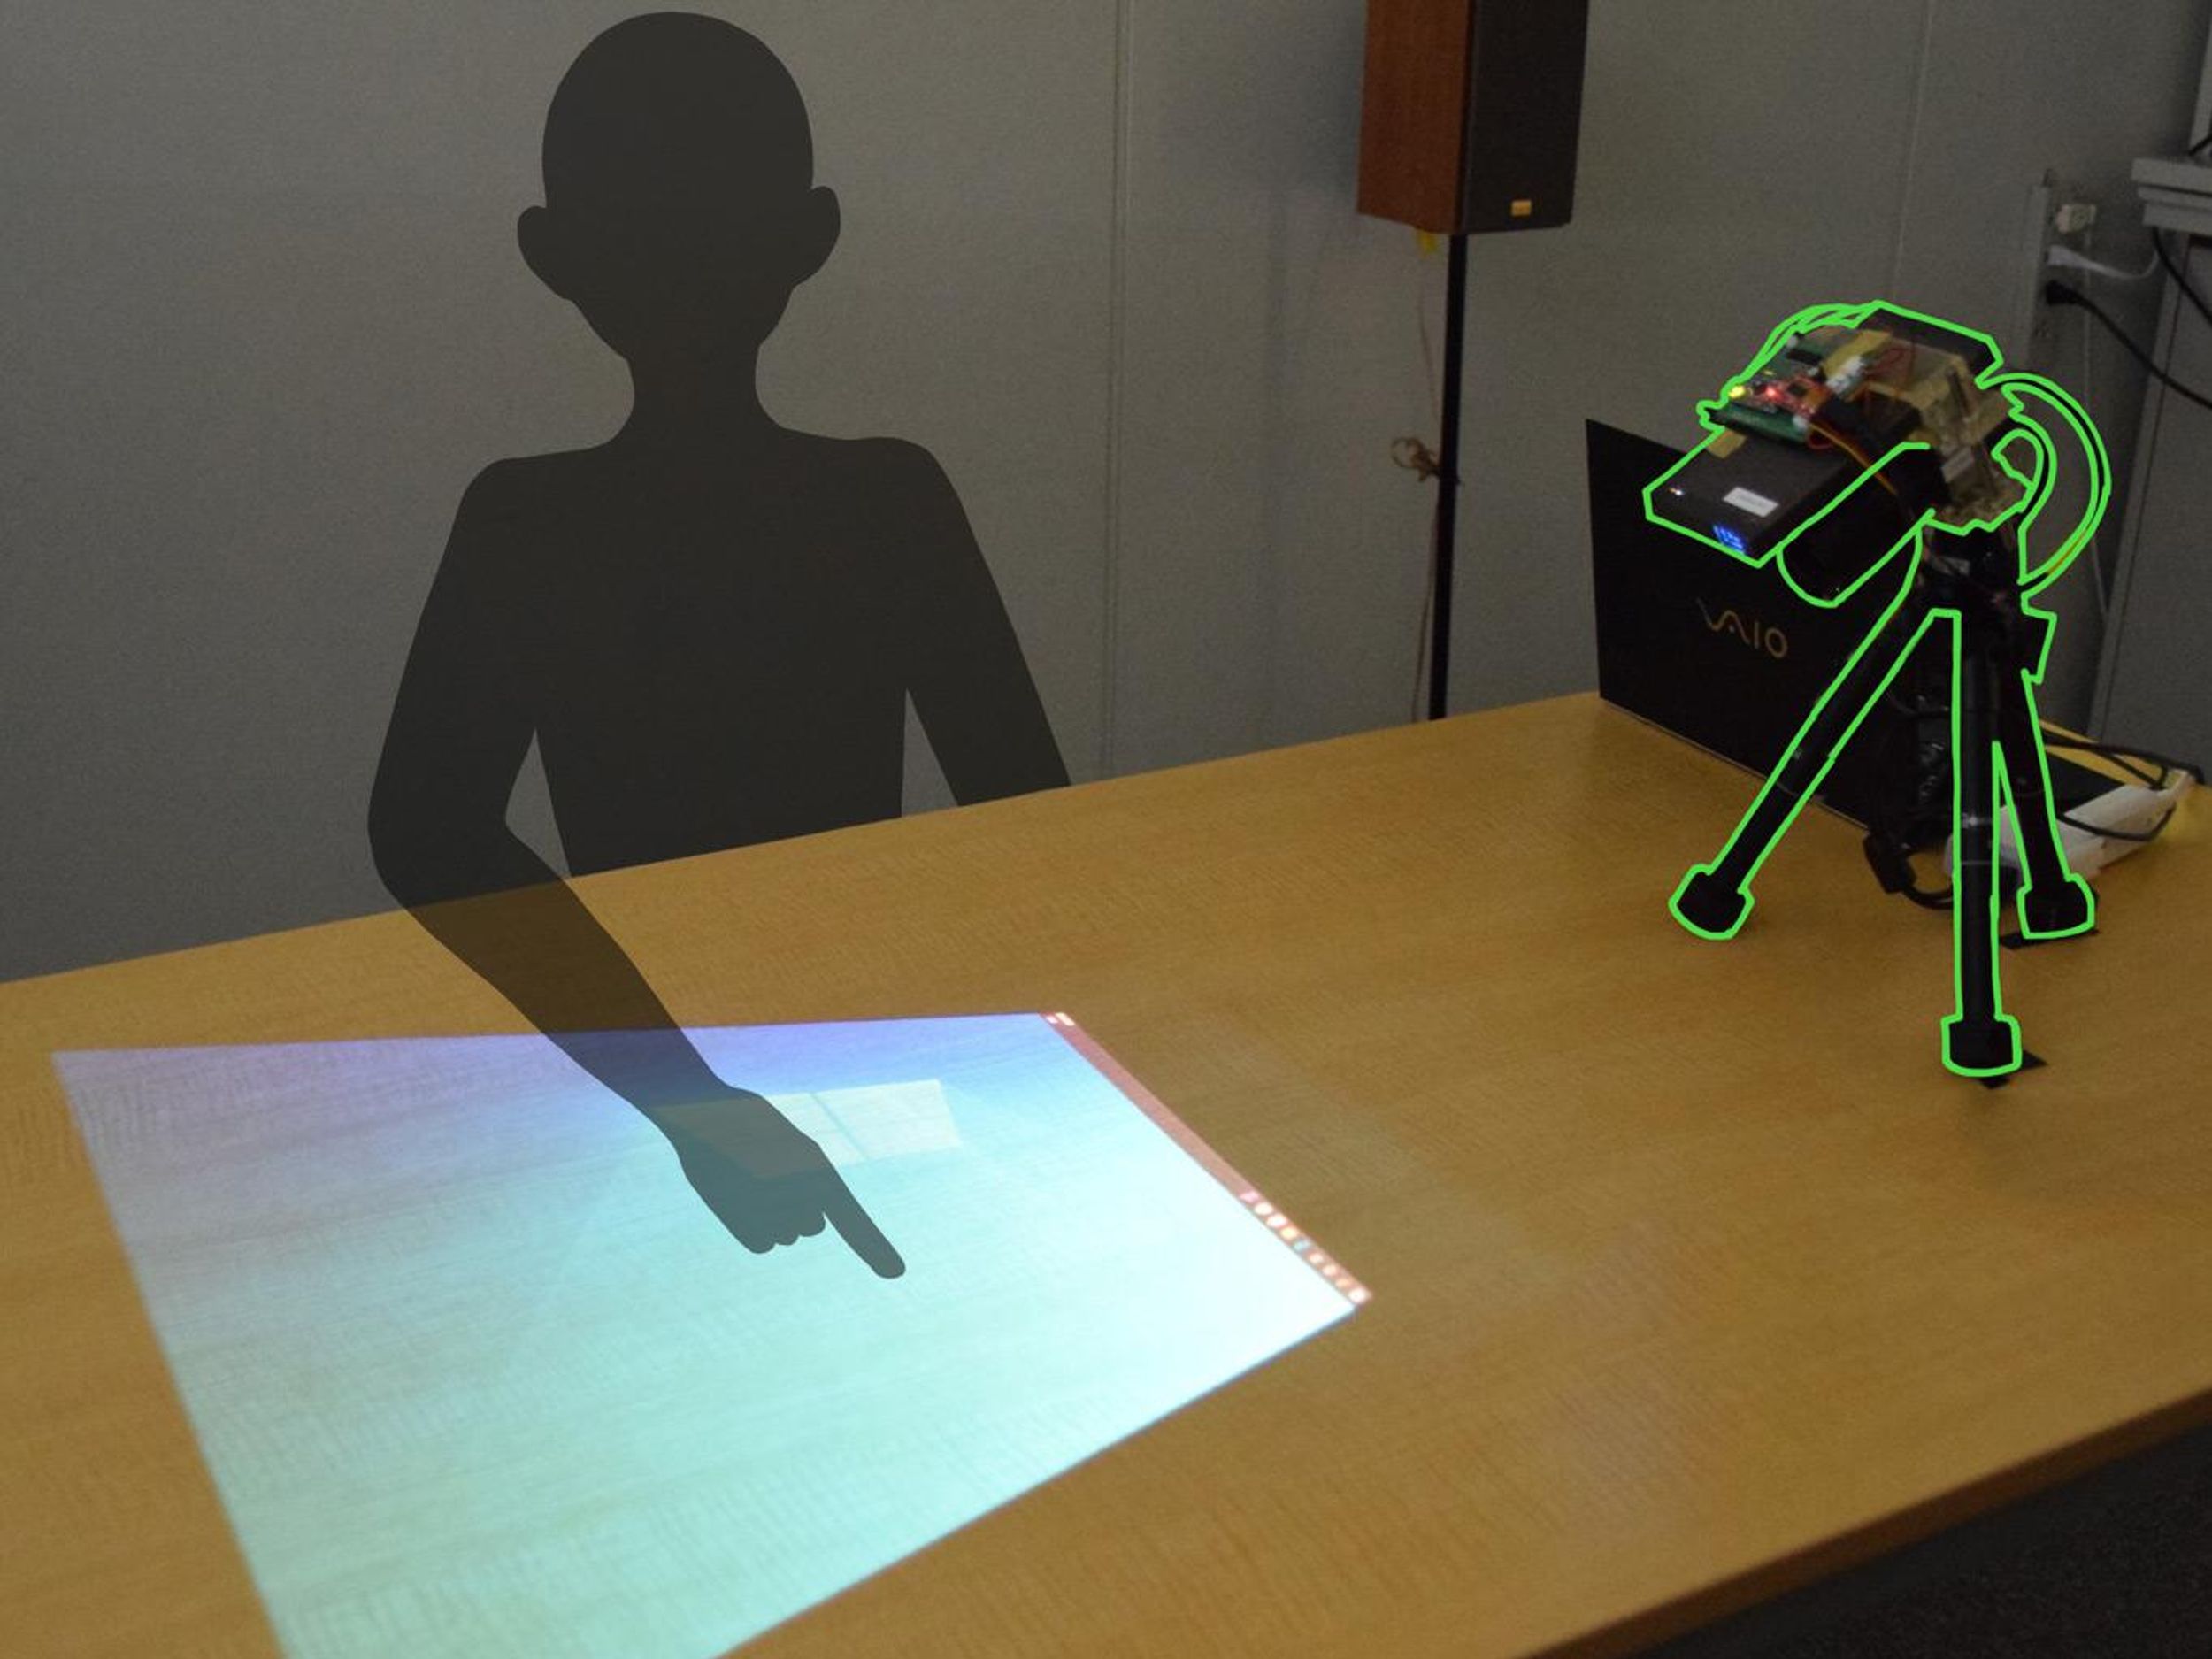 A projector-camera system that can display a touchscreen on any surface.